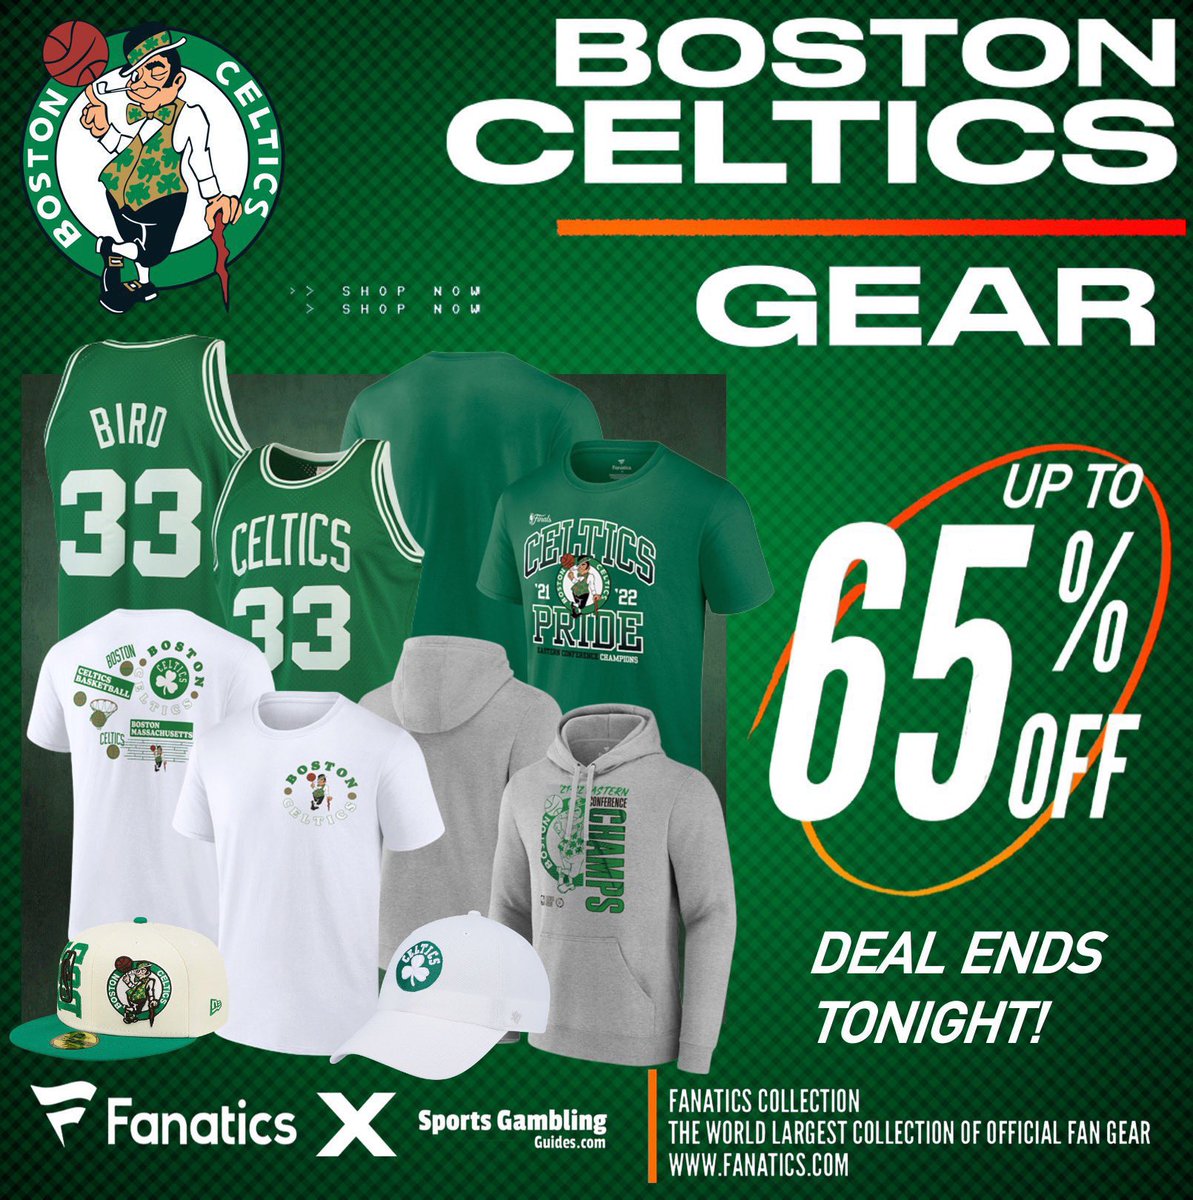 HUGE TUESDAY SALE, @Fanatics, UP TO 65% OFF CELTICS GEAR!🏆 CELTICS FANS, take advantage of Fanatics EXCLUSIVE offer and get up to 65% OFF Boston Celtics gear using THIS PROMO LINK: fanatics.93n6tx.net/CELTICPRIDE65 📈 DEAL ENDS SOON!🤝